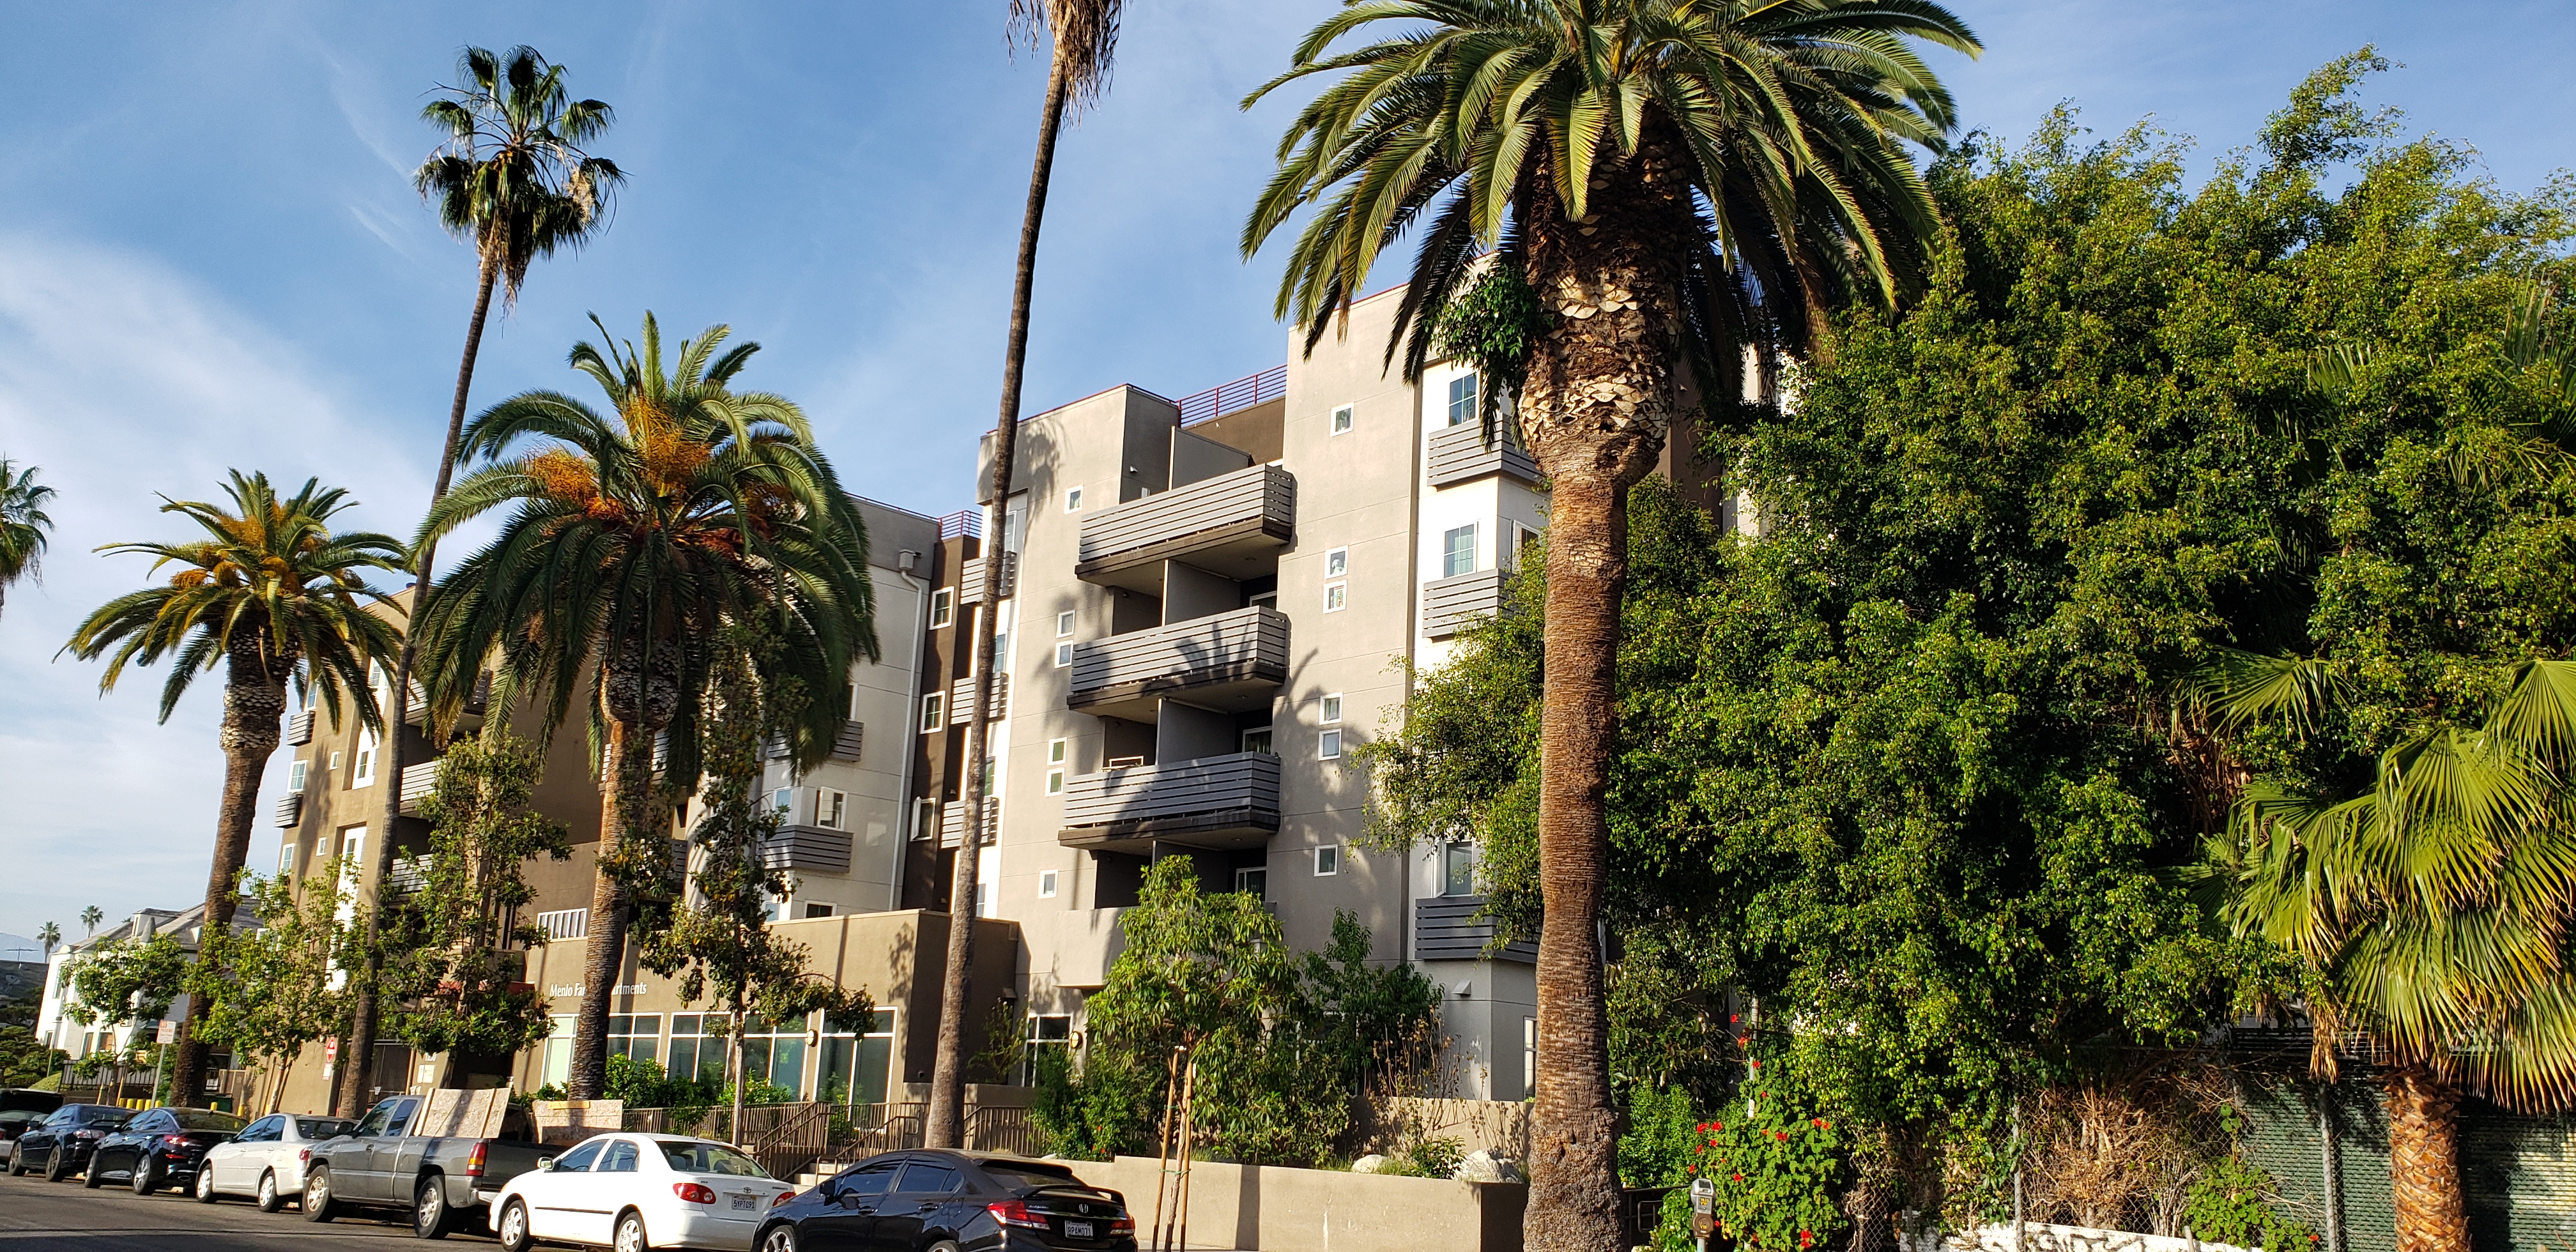 Street view of Menlo Family Housing with palm trees in front of building and cars parked along the street